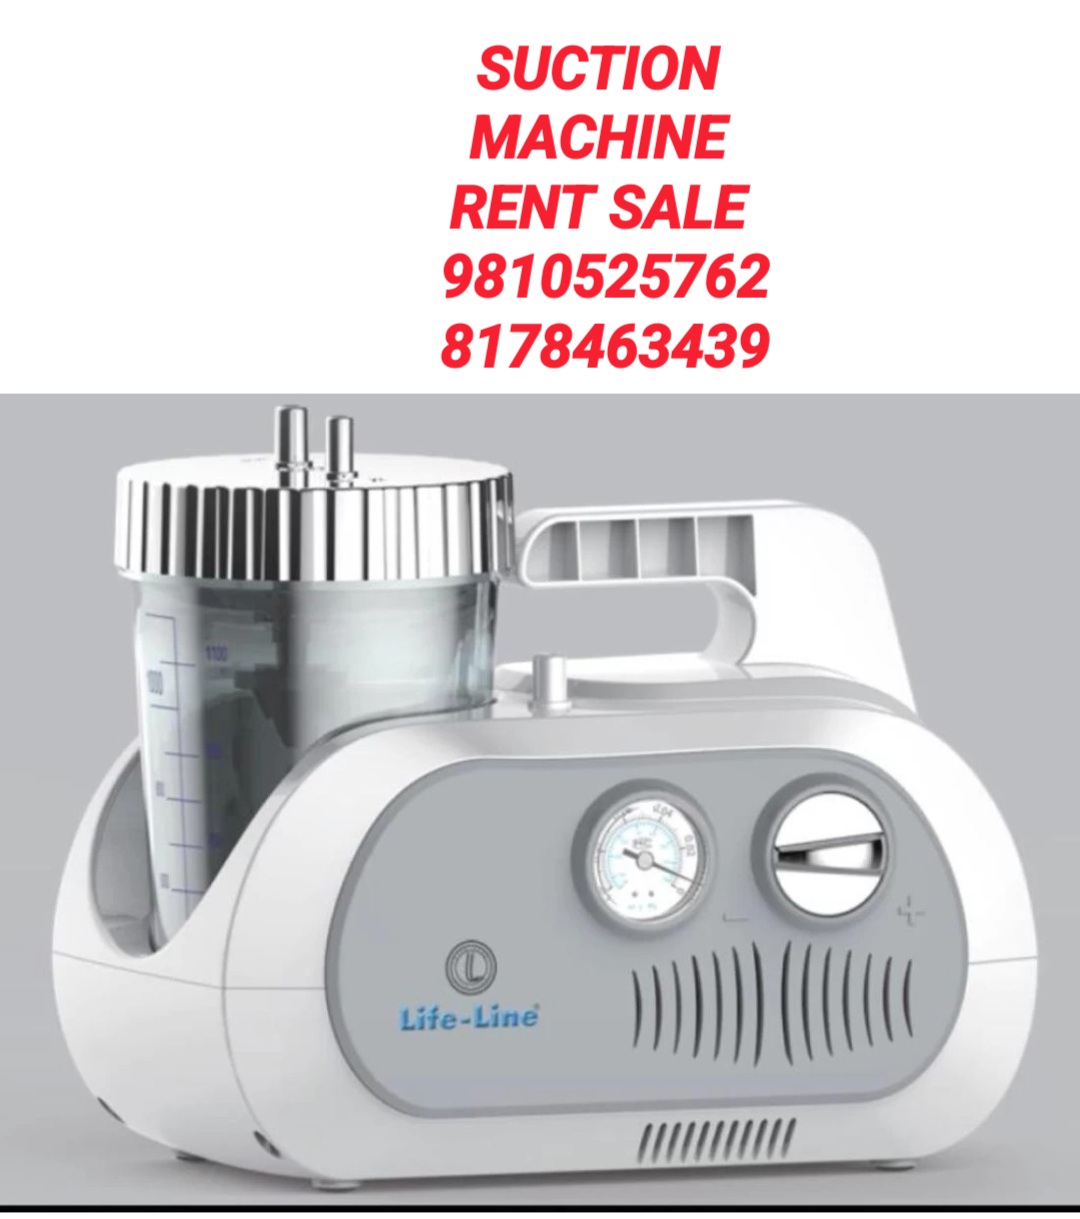 Suction Machine For Rent In Dilshad Garden 9810525762